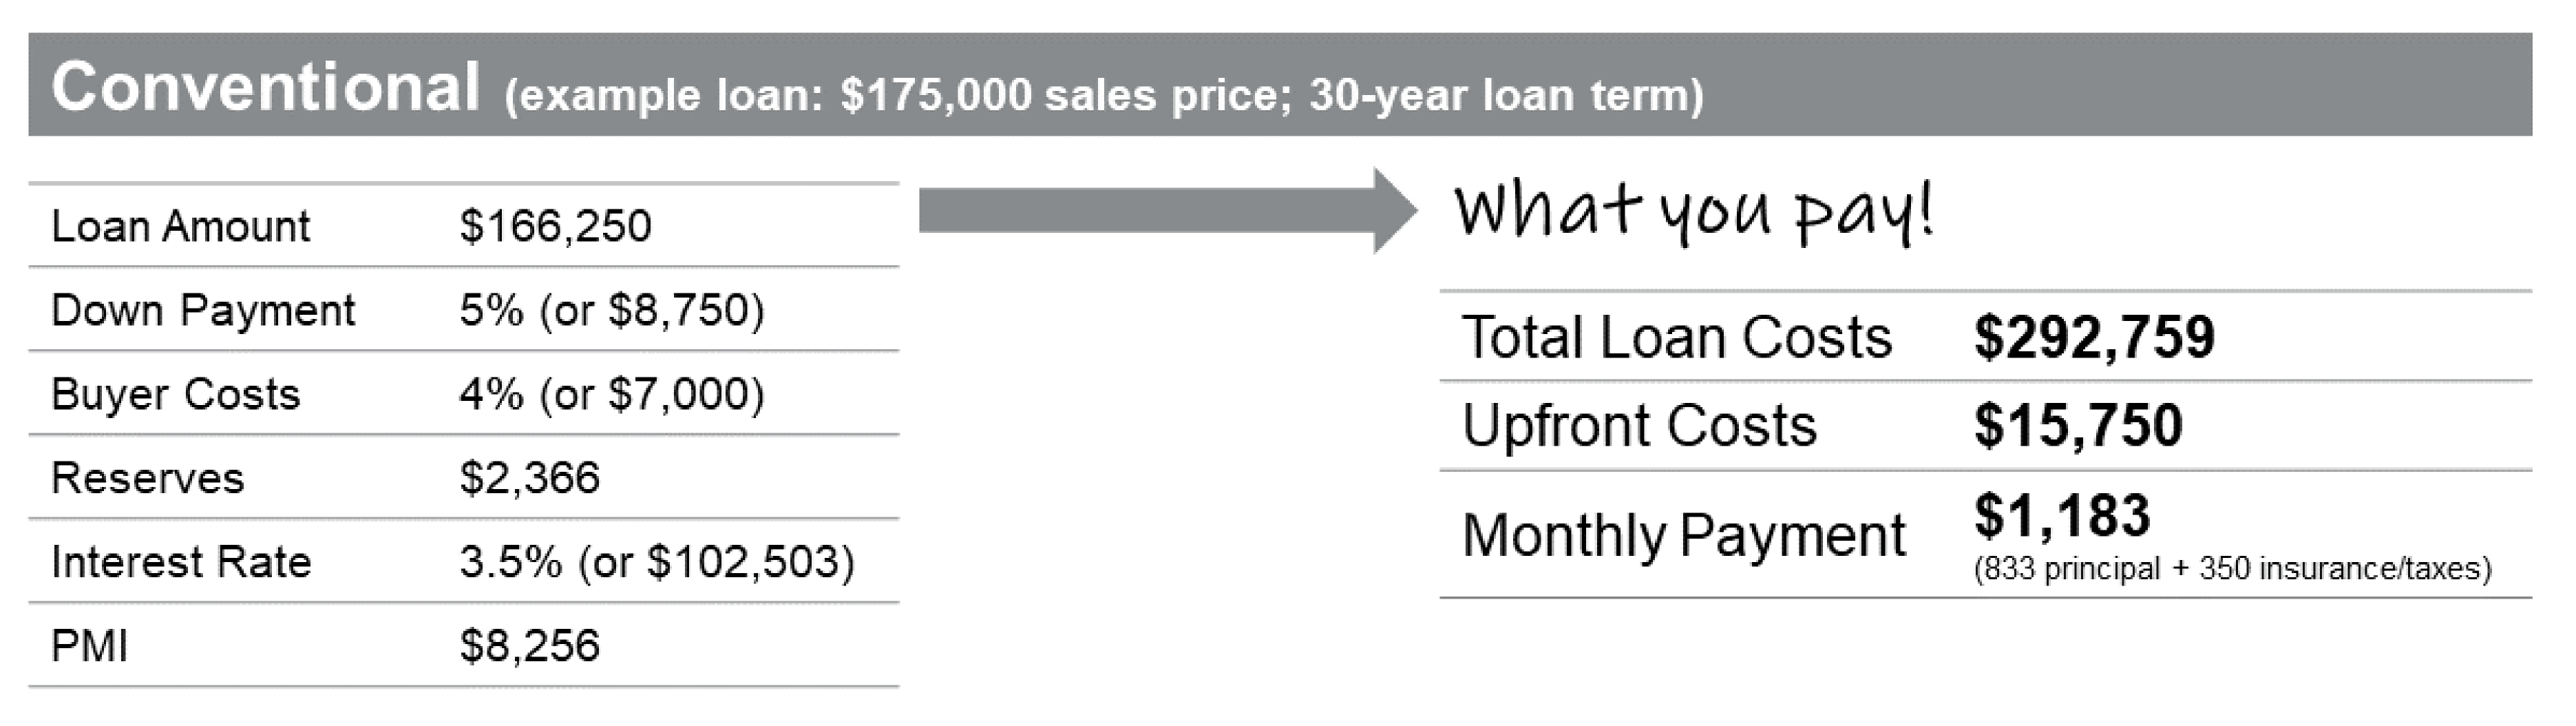 Conventional Loan Option 